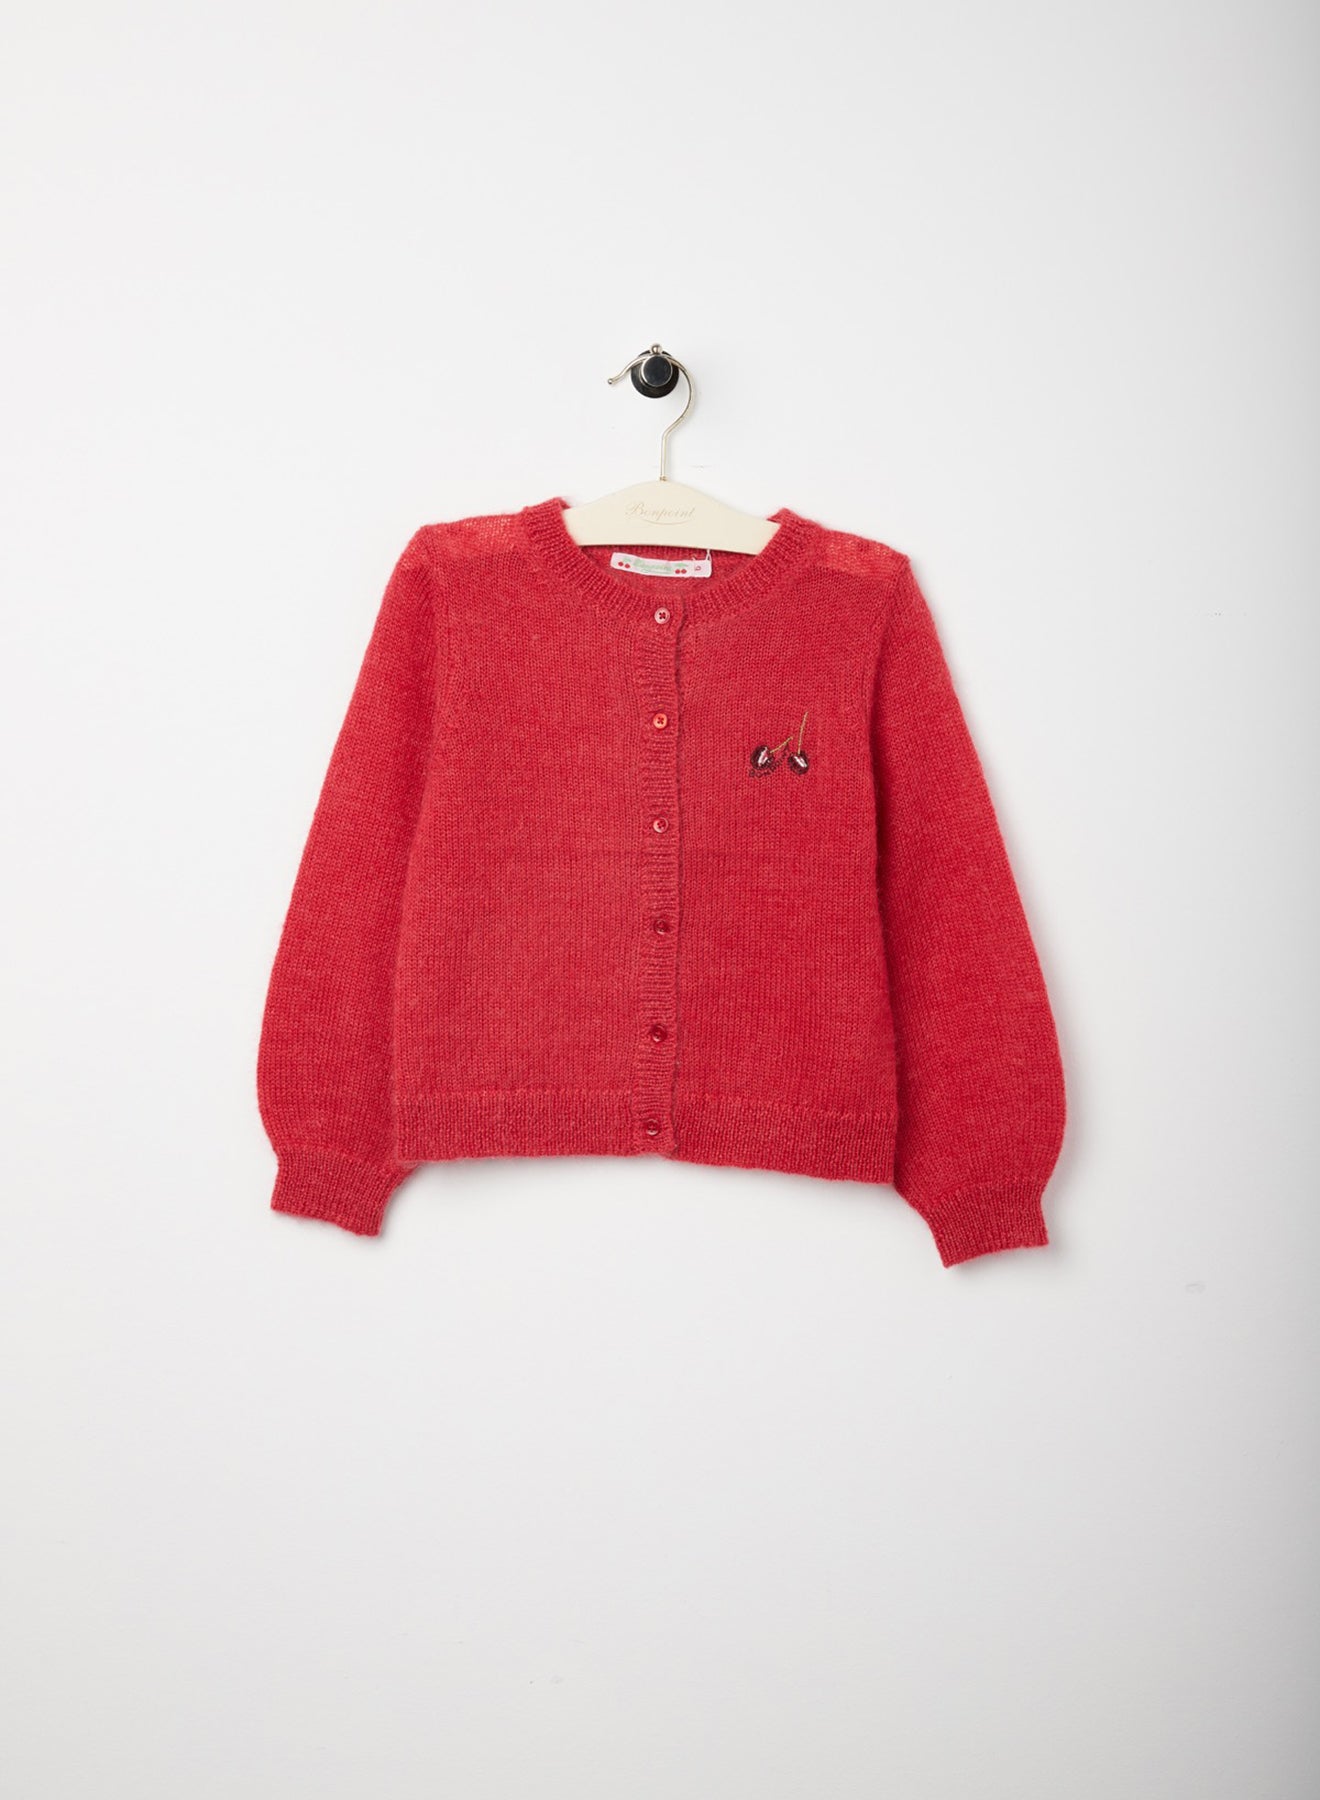 Bonpoint Red Cardigan with Little Cherry